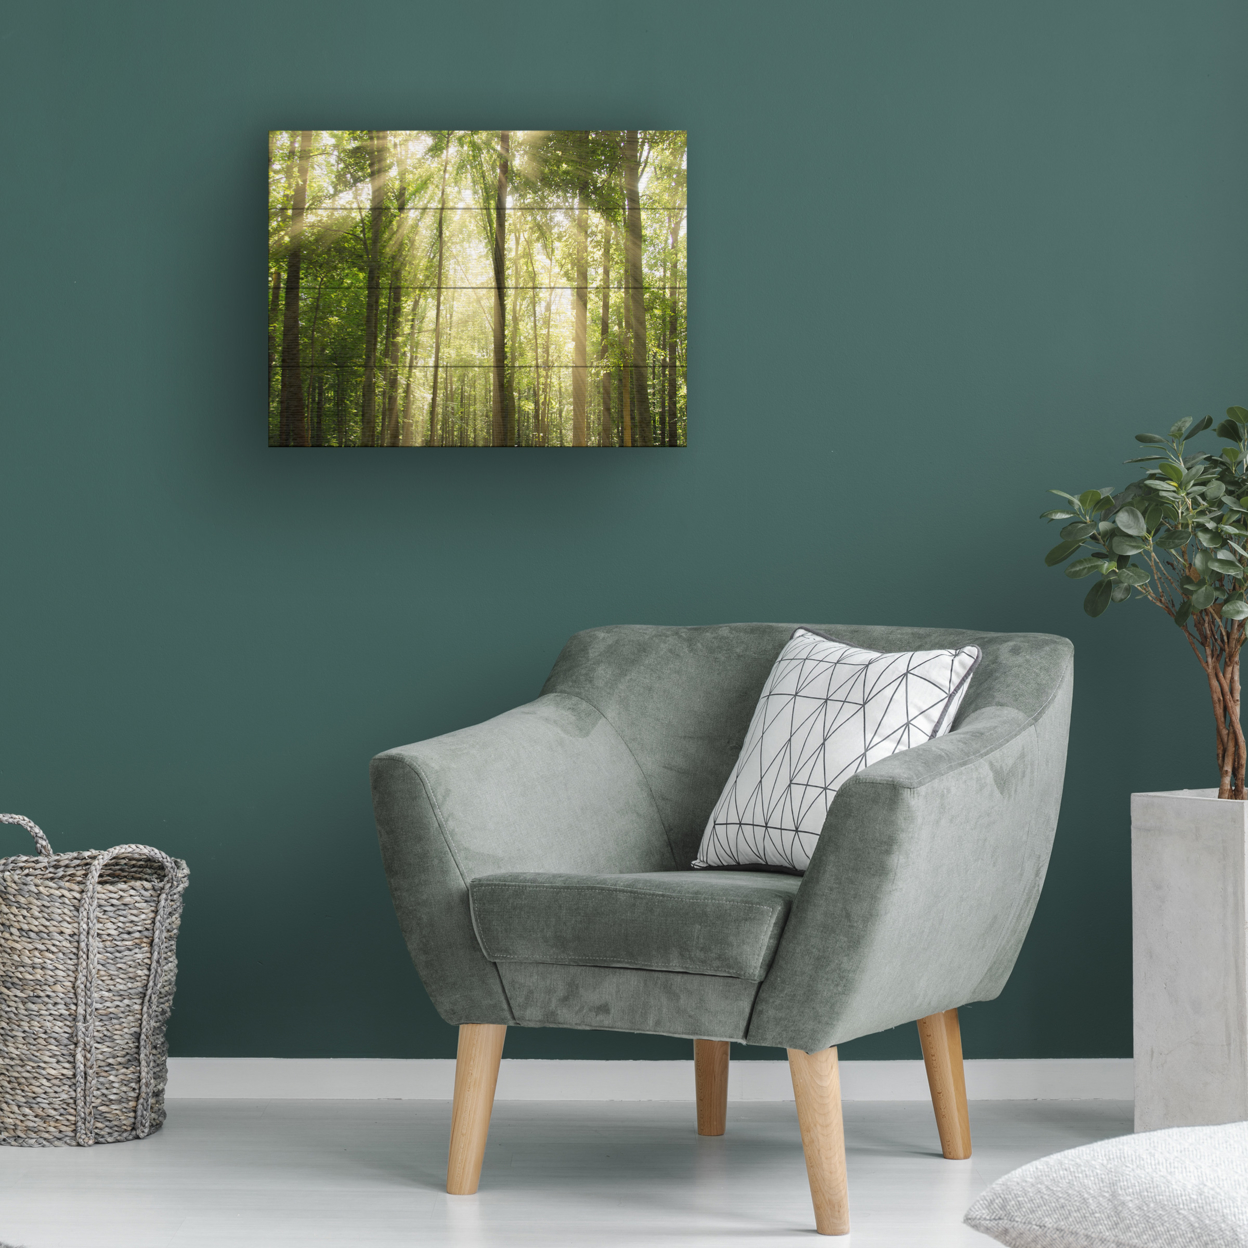 Wall Art 12 X 16 Inches Titled Sunrays Through Treetops Ready To Hang Printed On Wooden Planks